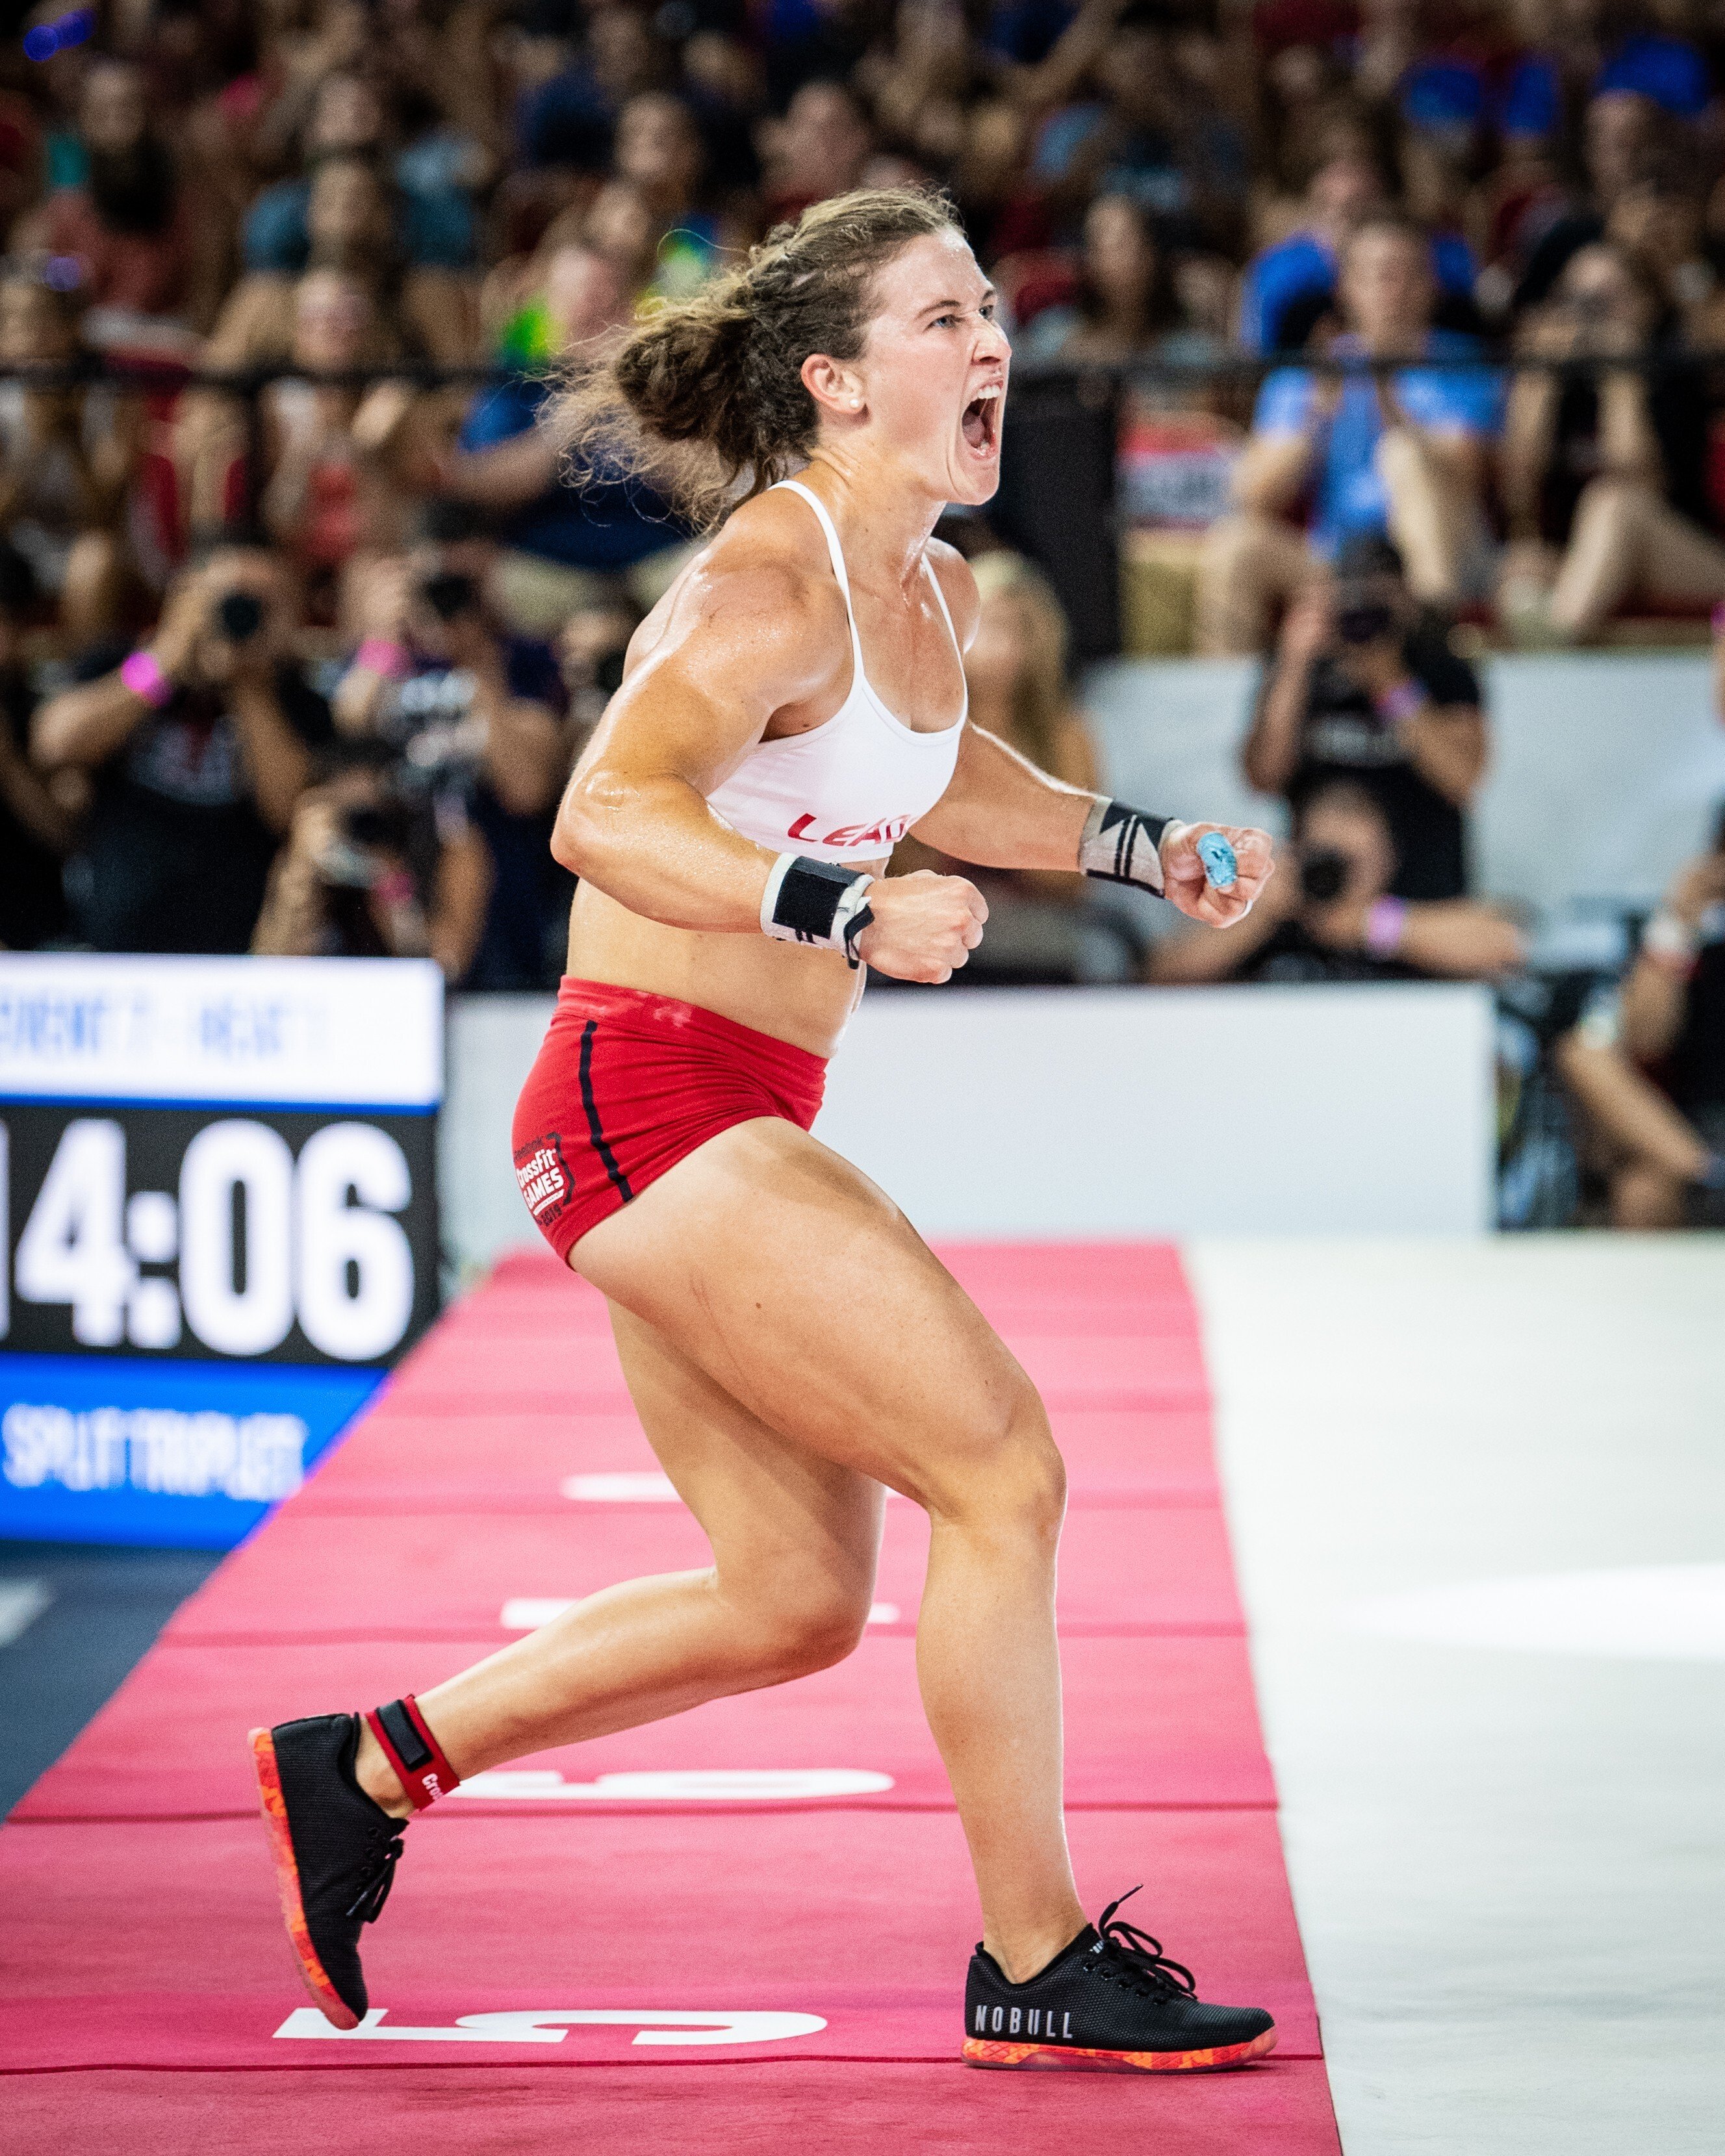 NOBULL: The Tia-Clair Toomey Collection CrossFit Games 2020: Tia-Clair Toom...